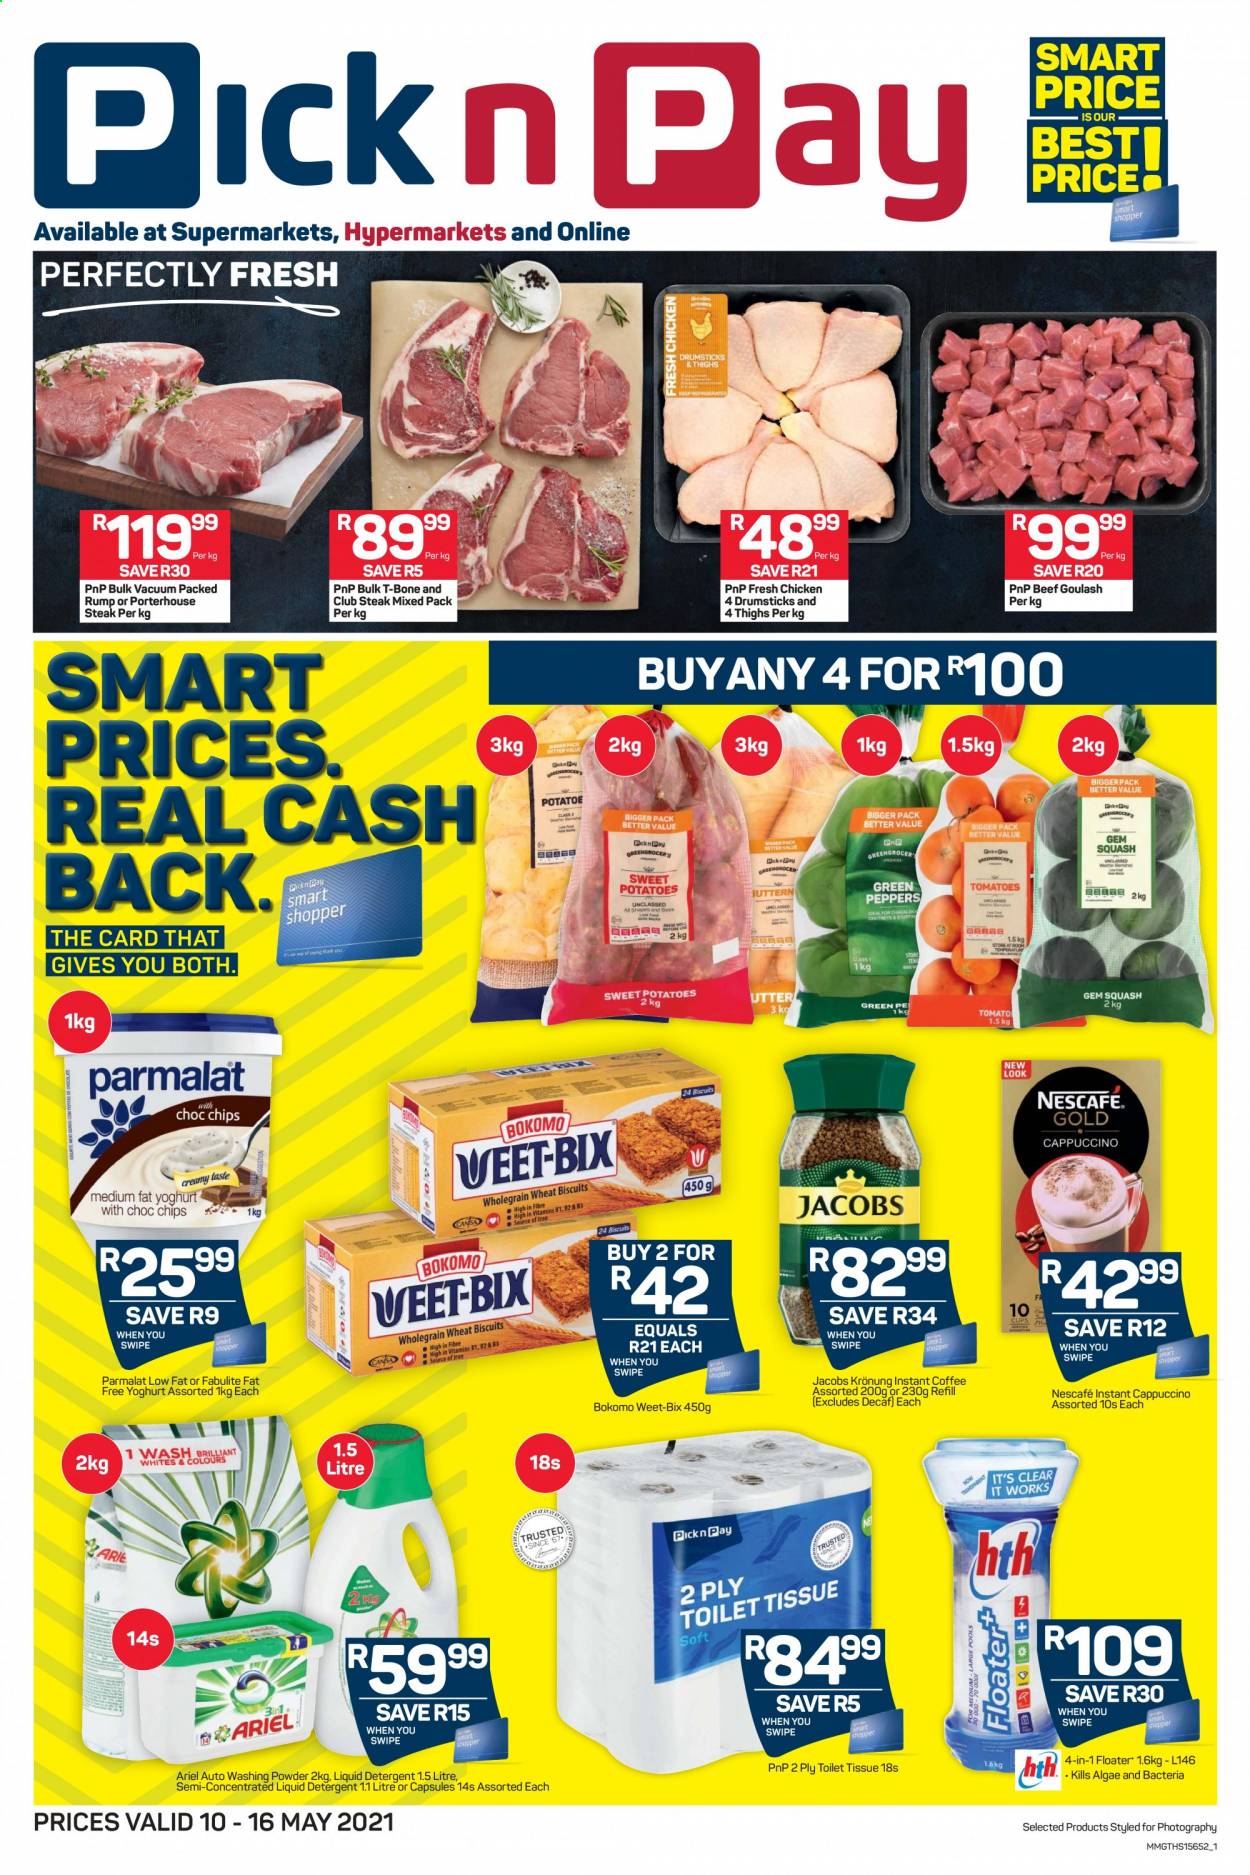 Pick n Pay specials - 05.10.2021 - 05.16.2021. 